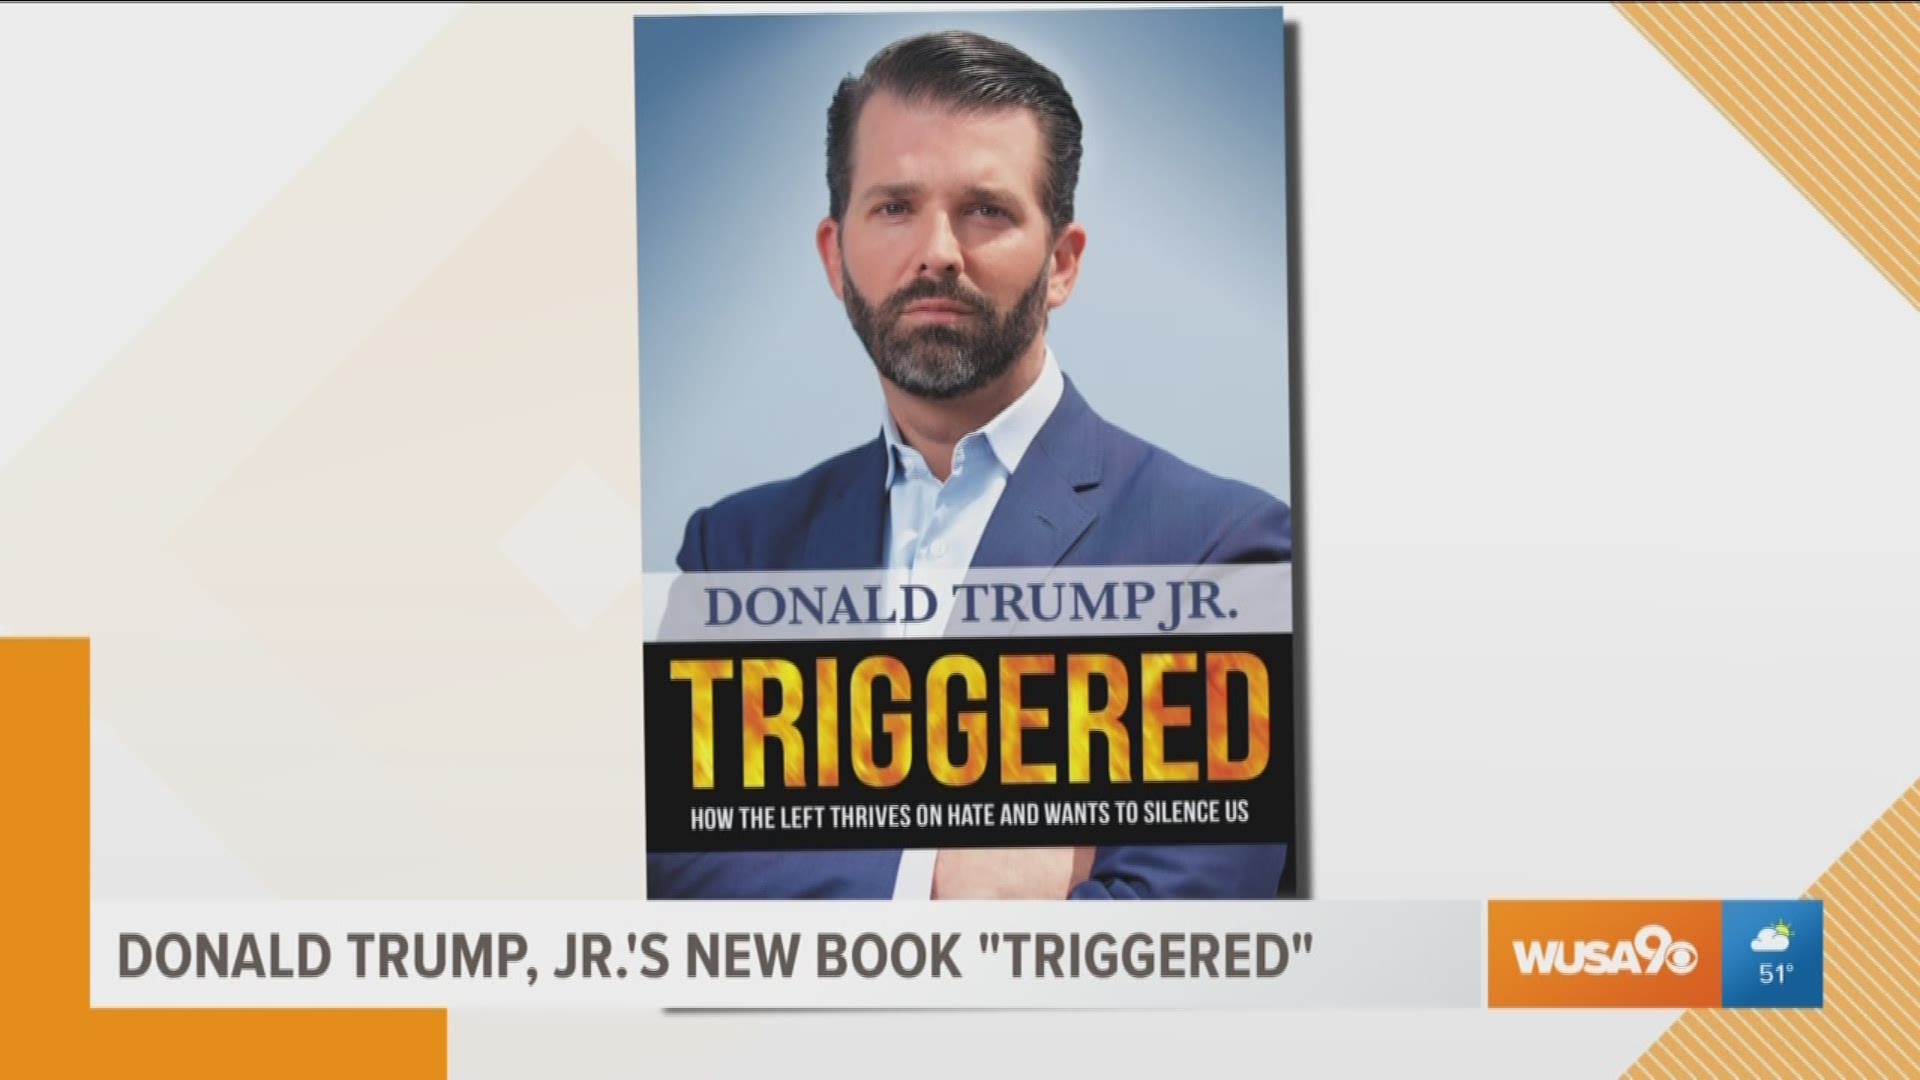 Donald Trump Jr. has released his new book, "Triggered". During an interview on Great Day Washington, he dives deeper into his thoughts and opinions.